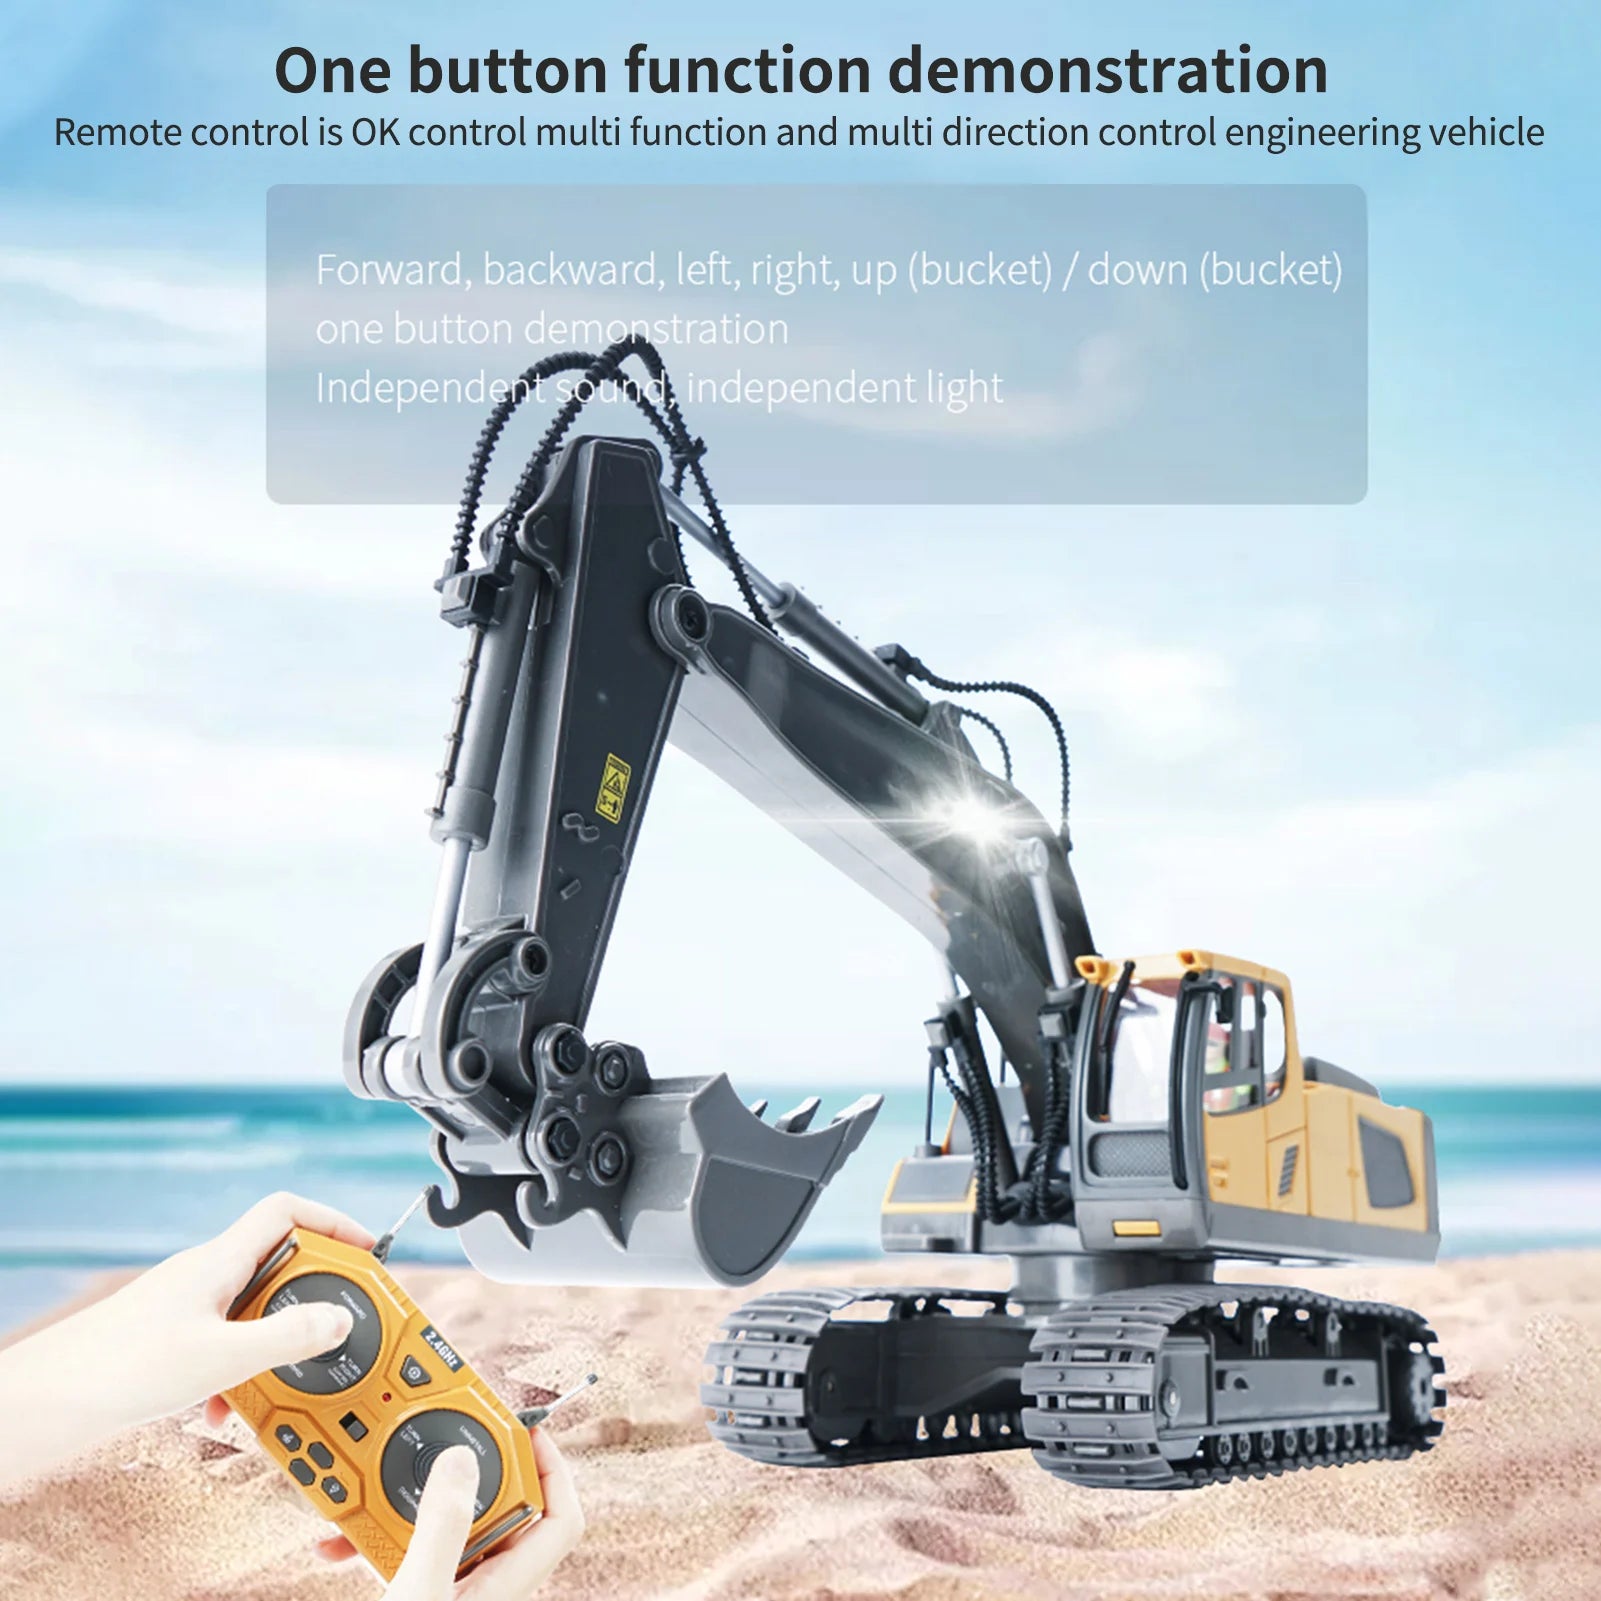 one button function demonstration Remote control is OK control multi function and multi direction control engineering vehicle .